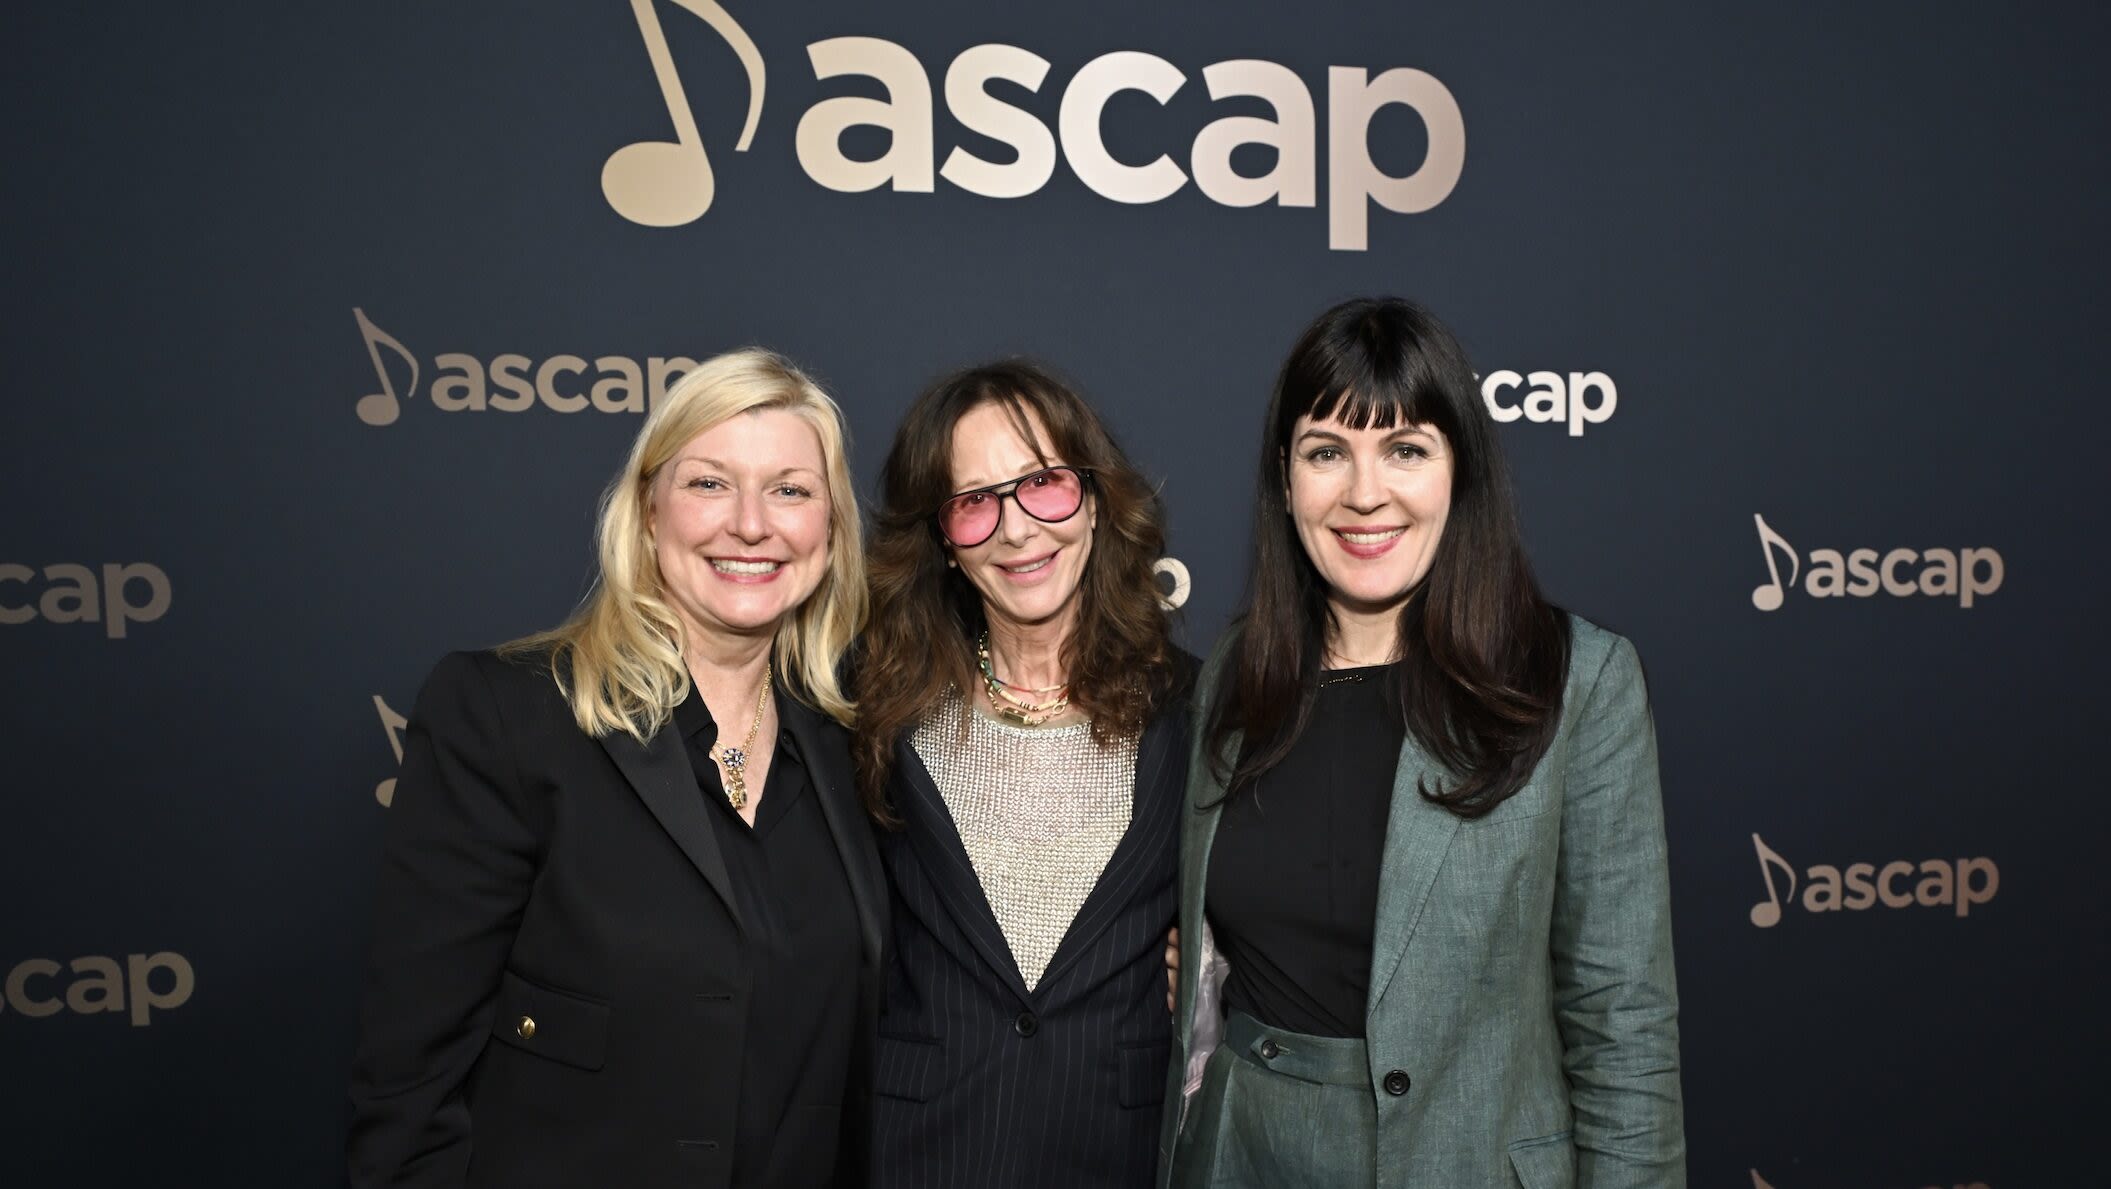 ASCAP CEO thanks Universal, Jody Gerson for ‘hard fight’ to improve songwriters’ pay from TikTok licensing deal - Music Business Worldwide